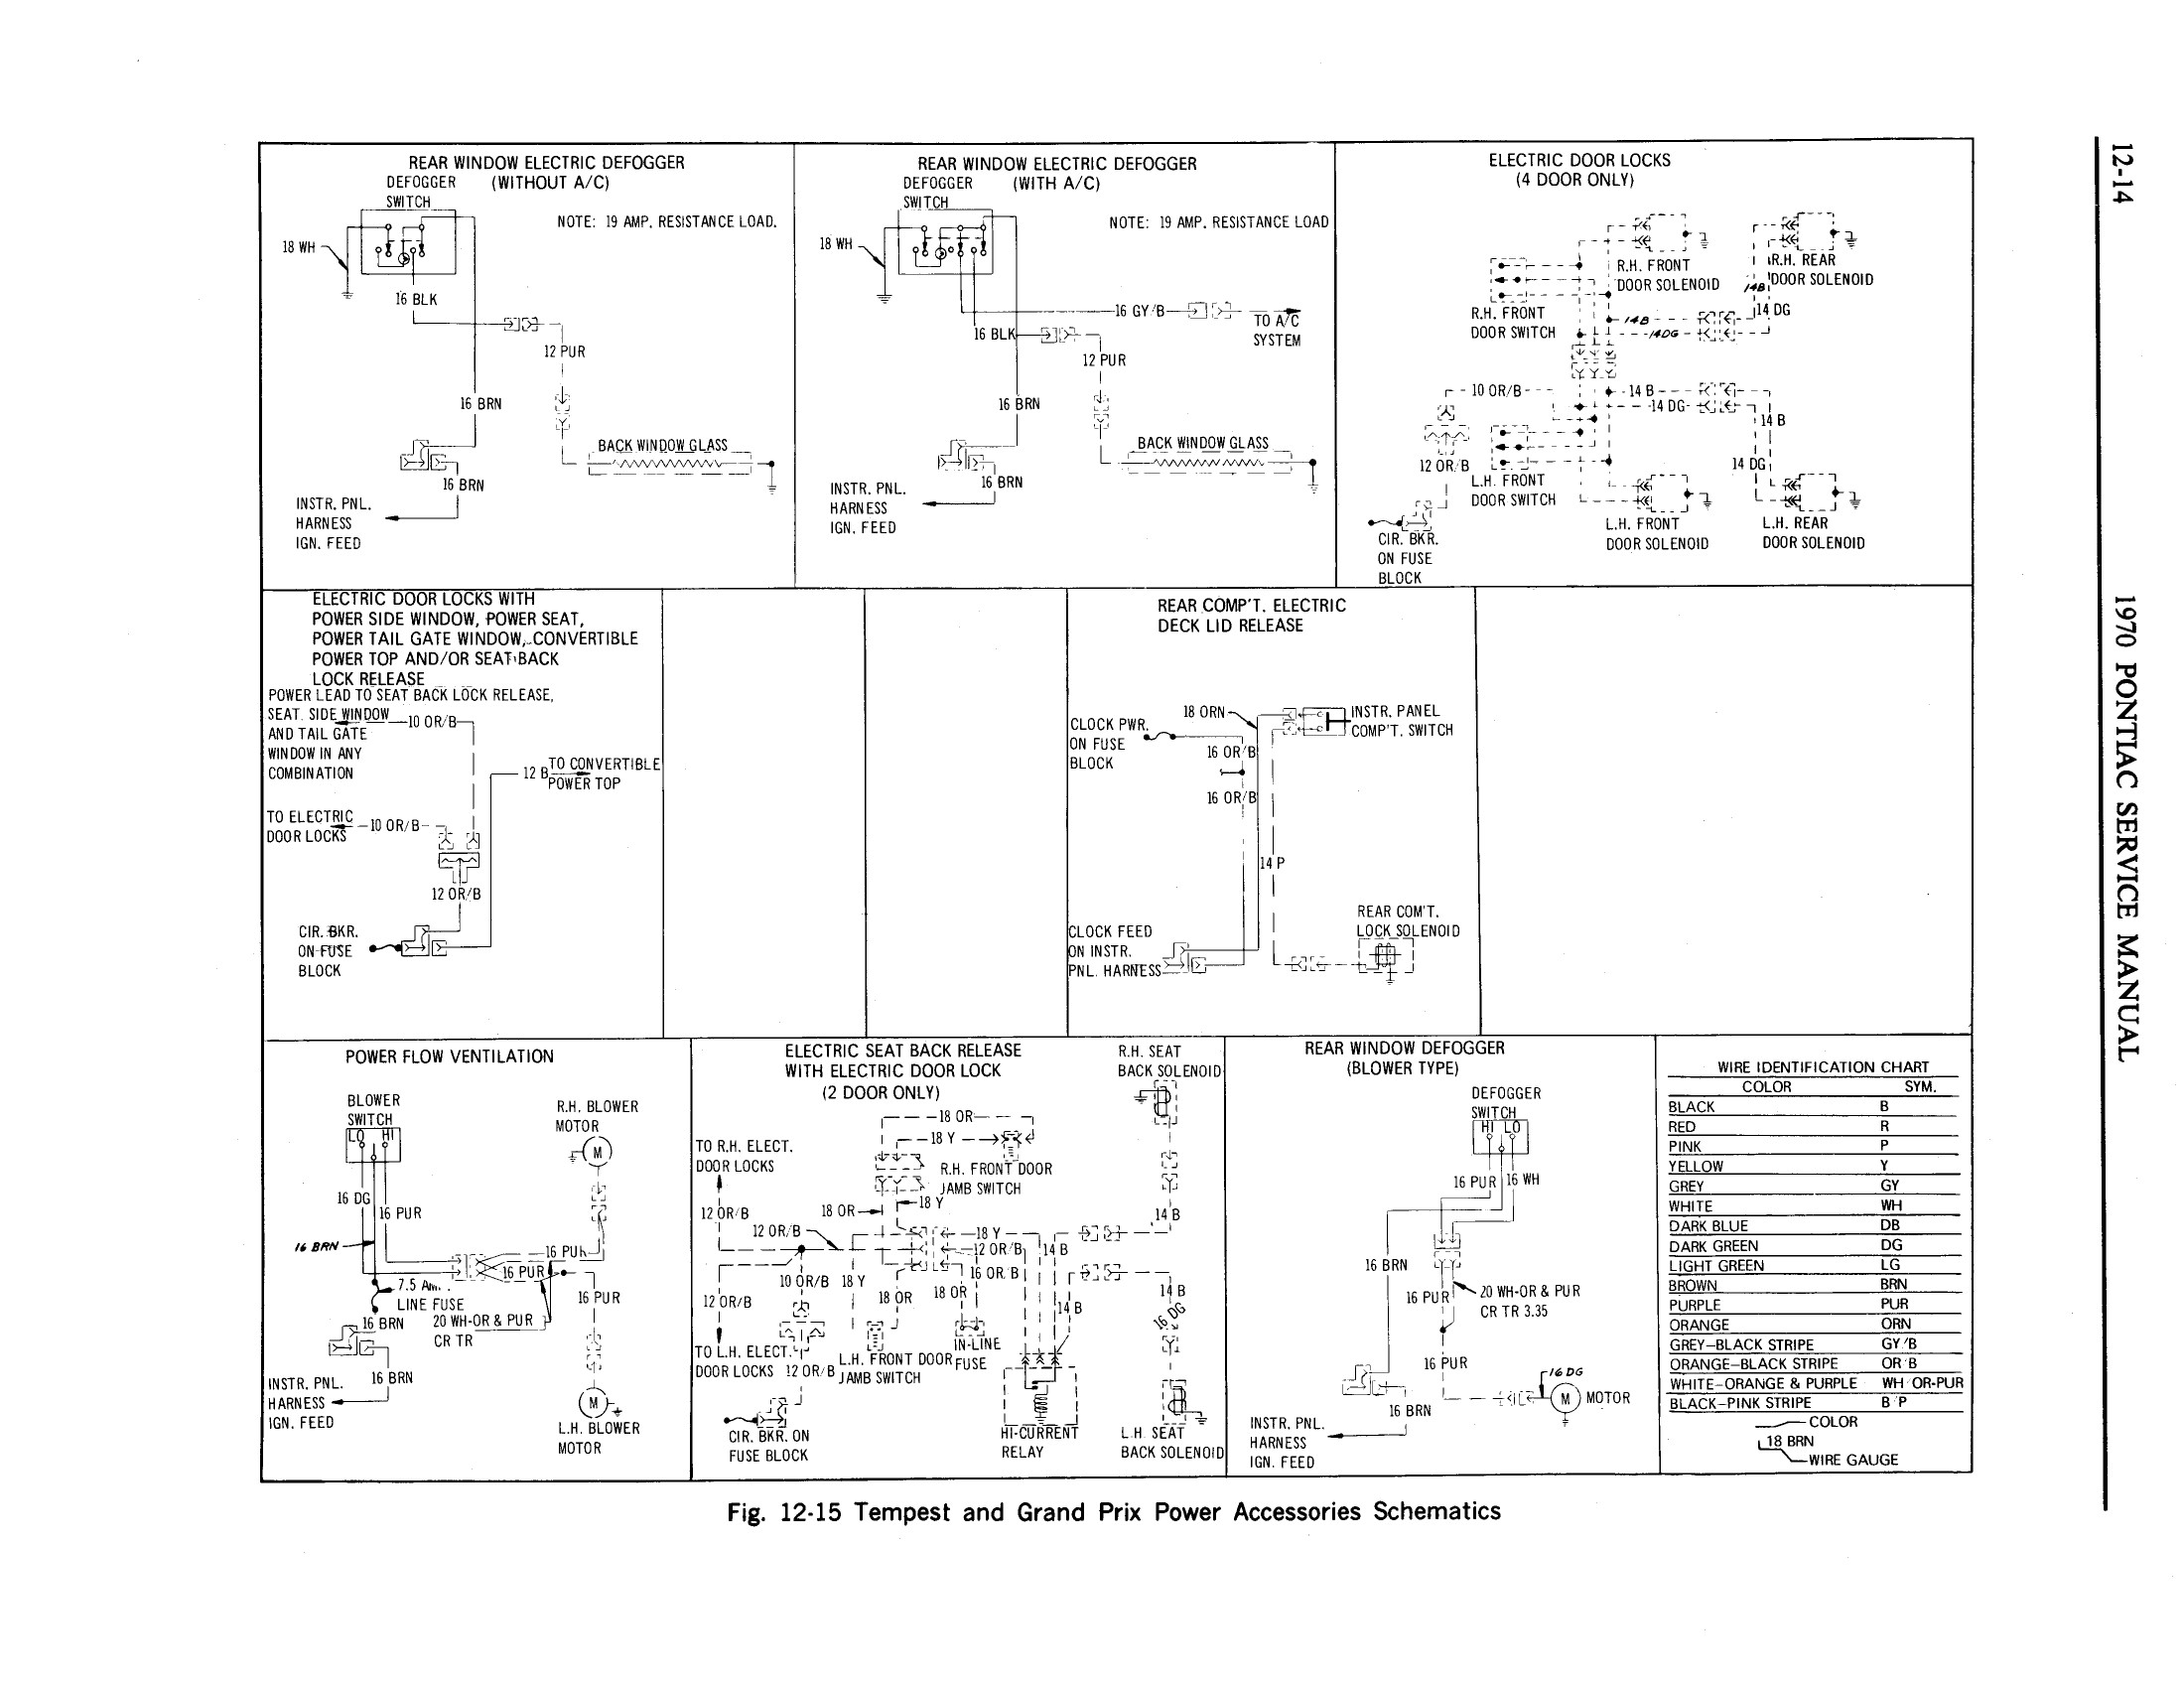 1970 Pontiac Chassis Service Manual - Chassis Electrical Page 14 of 67